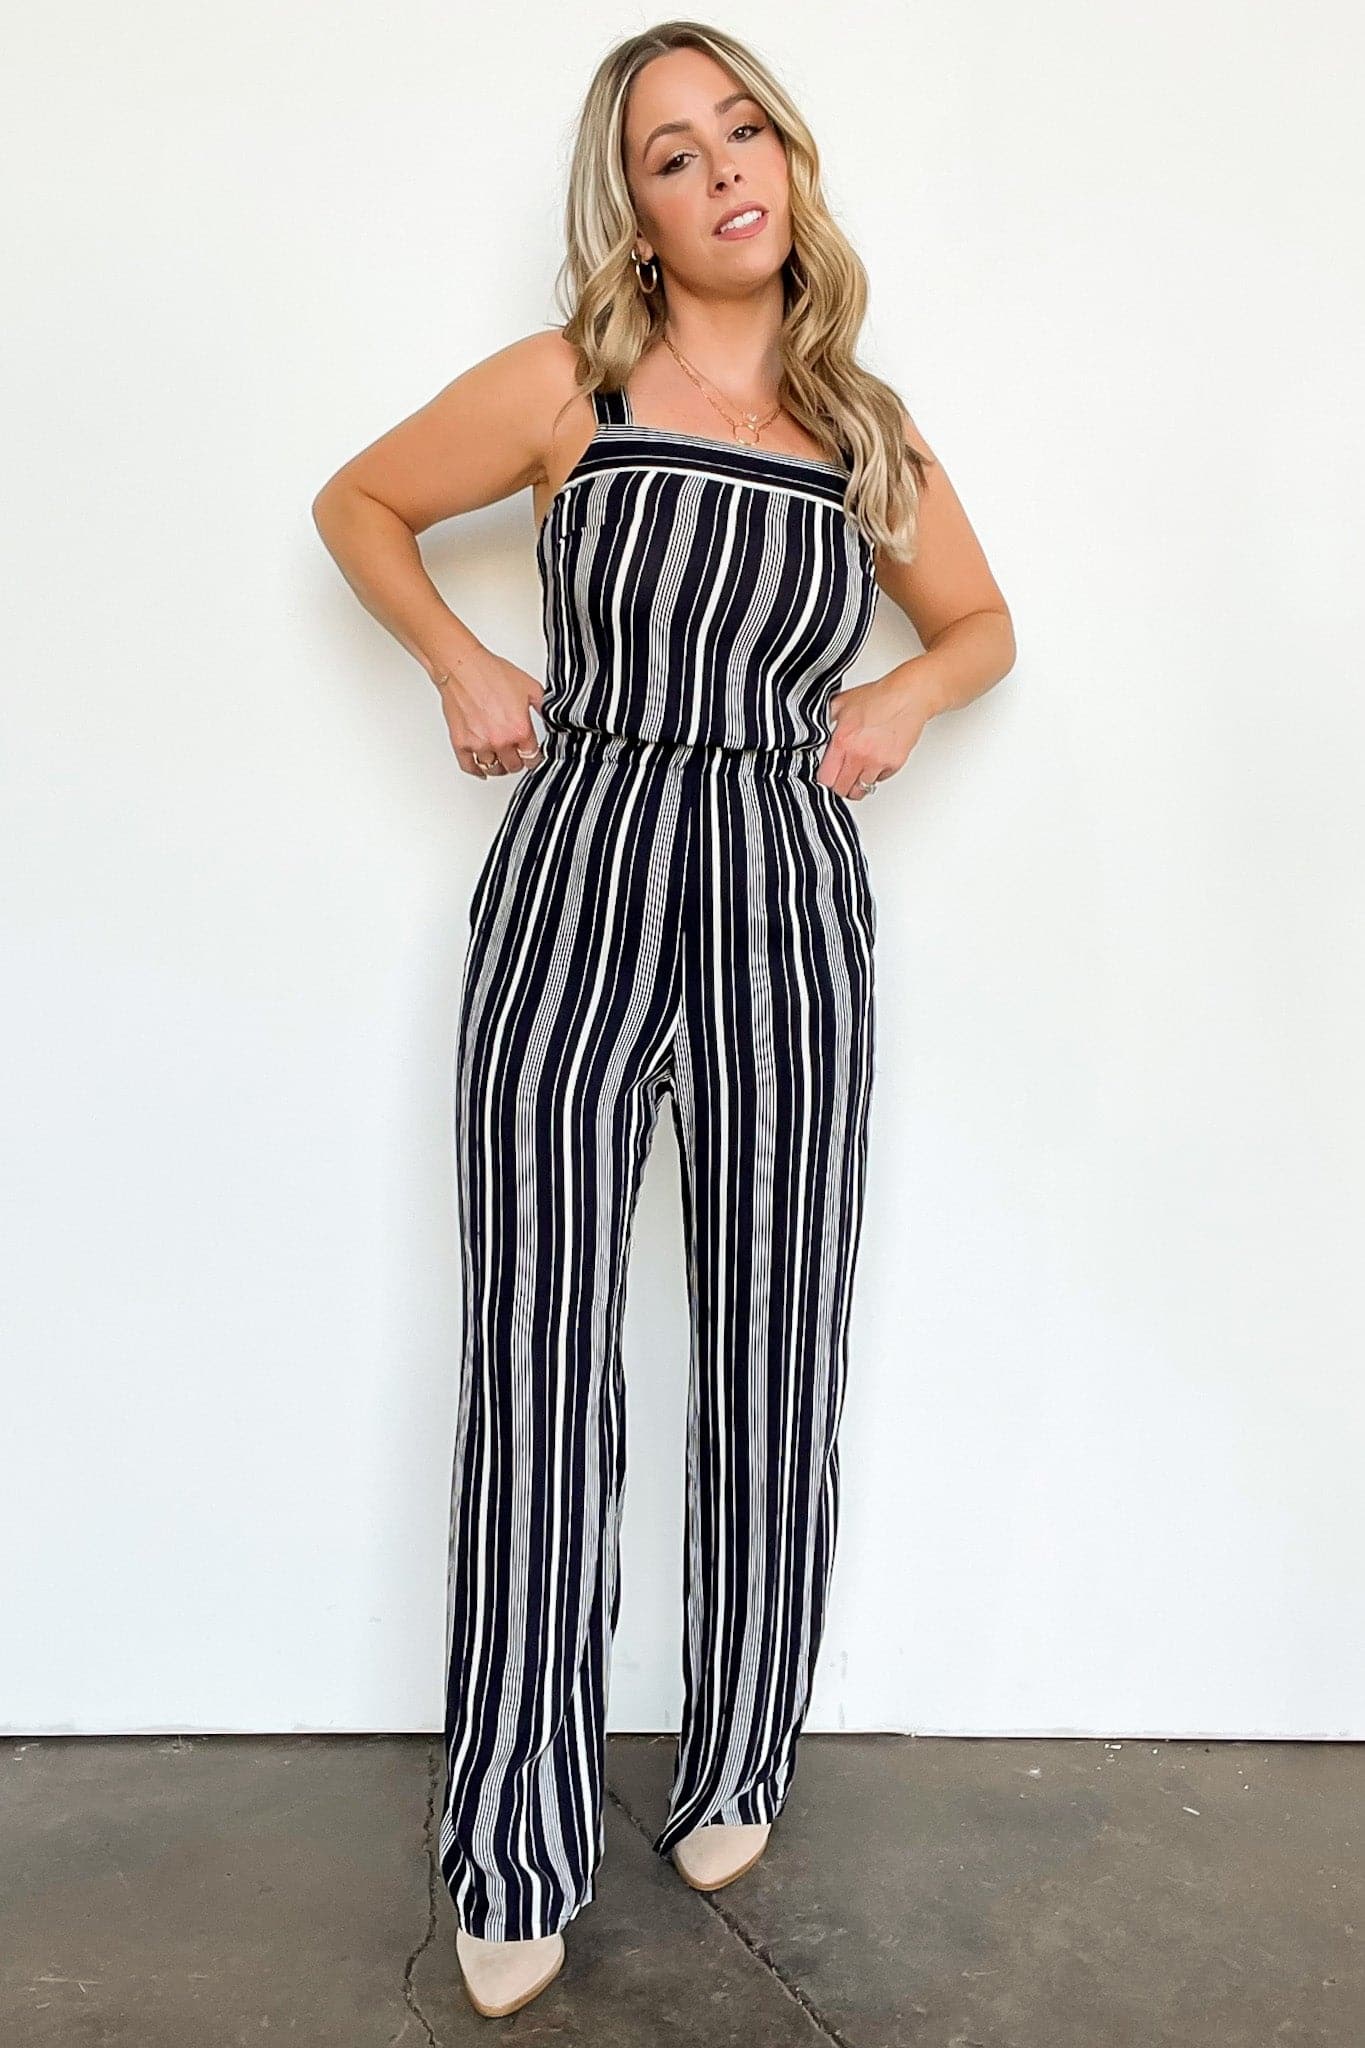  Cambre Striped Tie Back Jumpsuit - FINAL SALE - Madison and Mallory